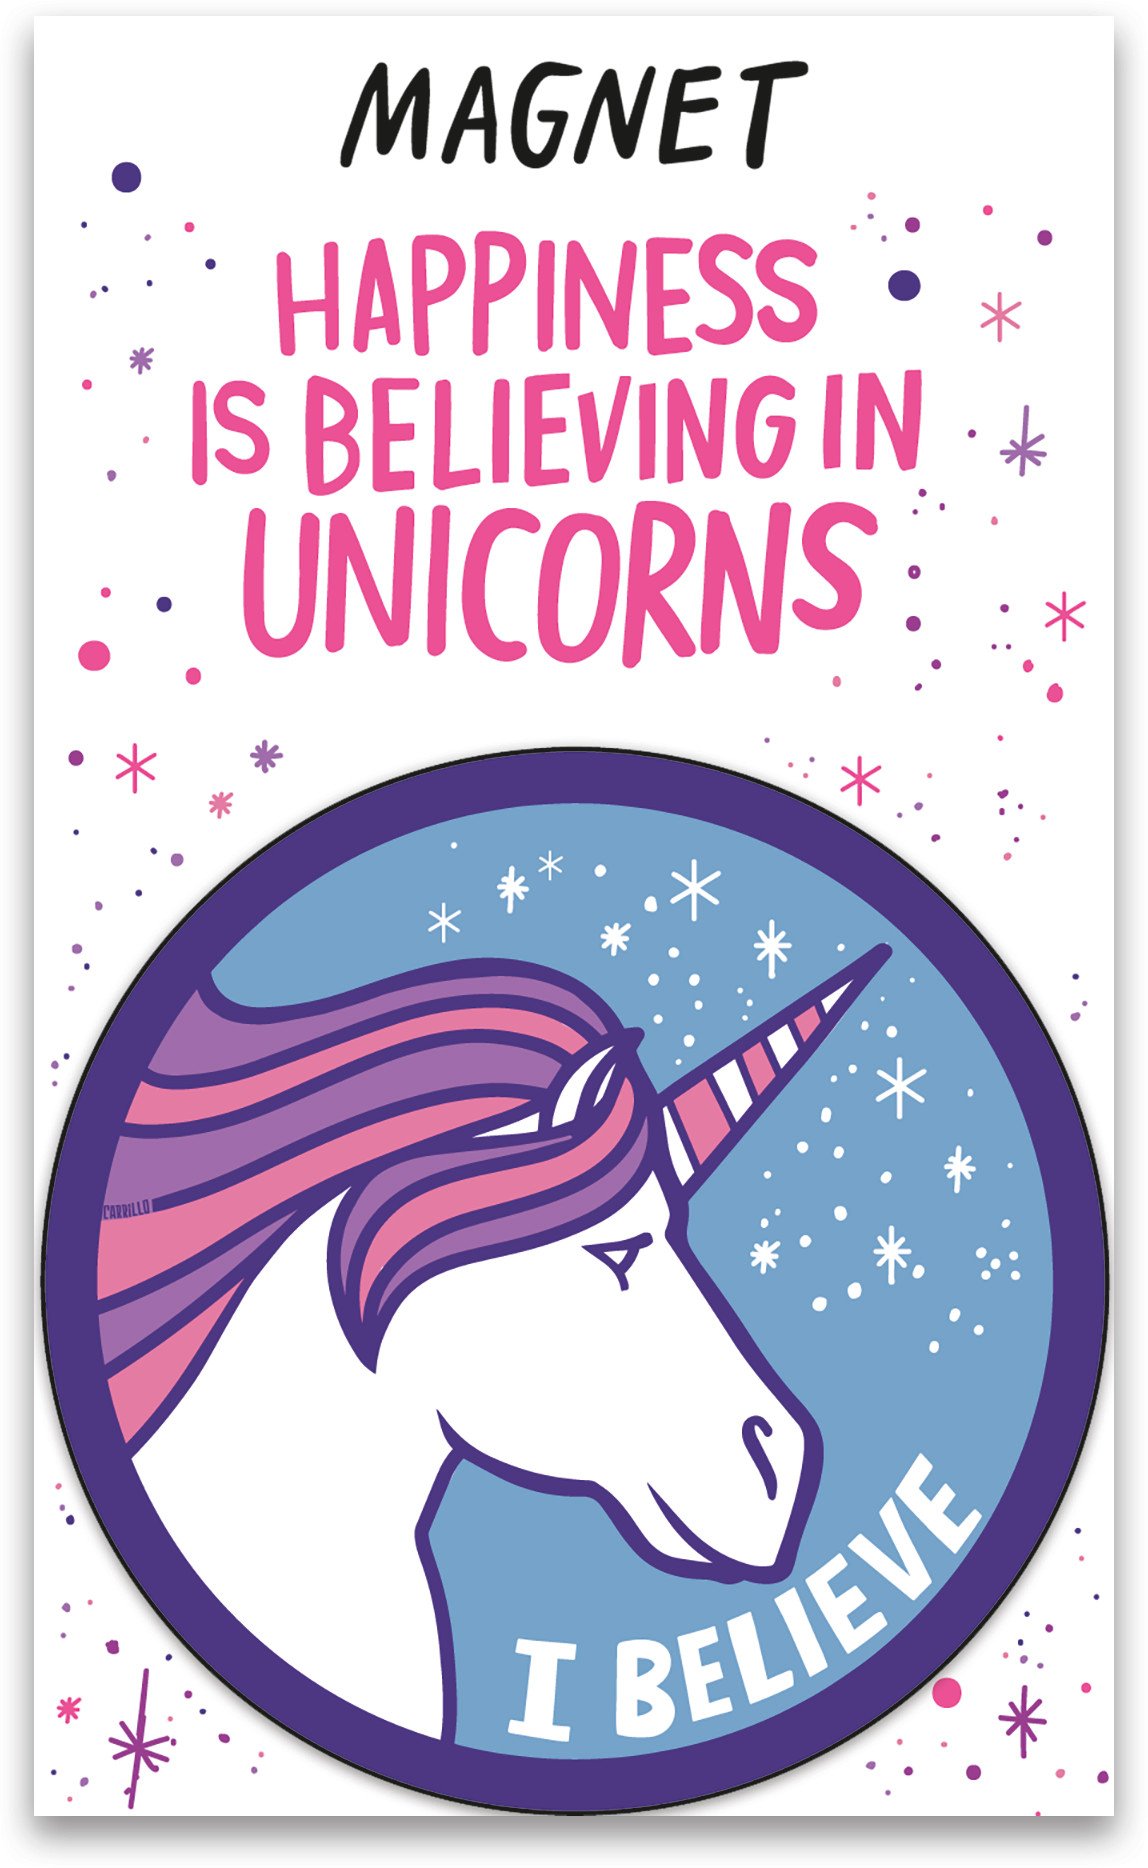 Download Magnet - I Believe In Unicorns - LOL Made You Smile ...